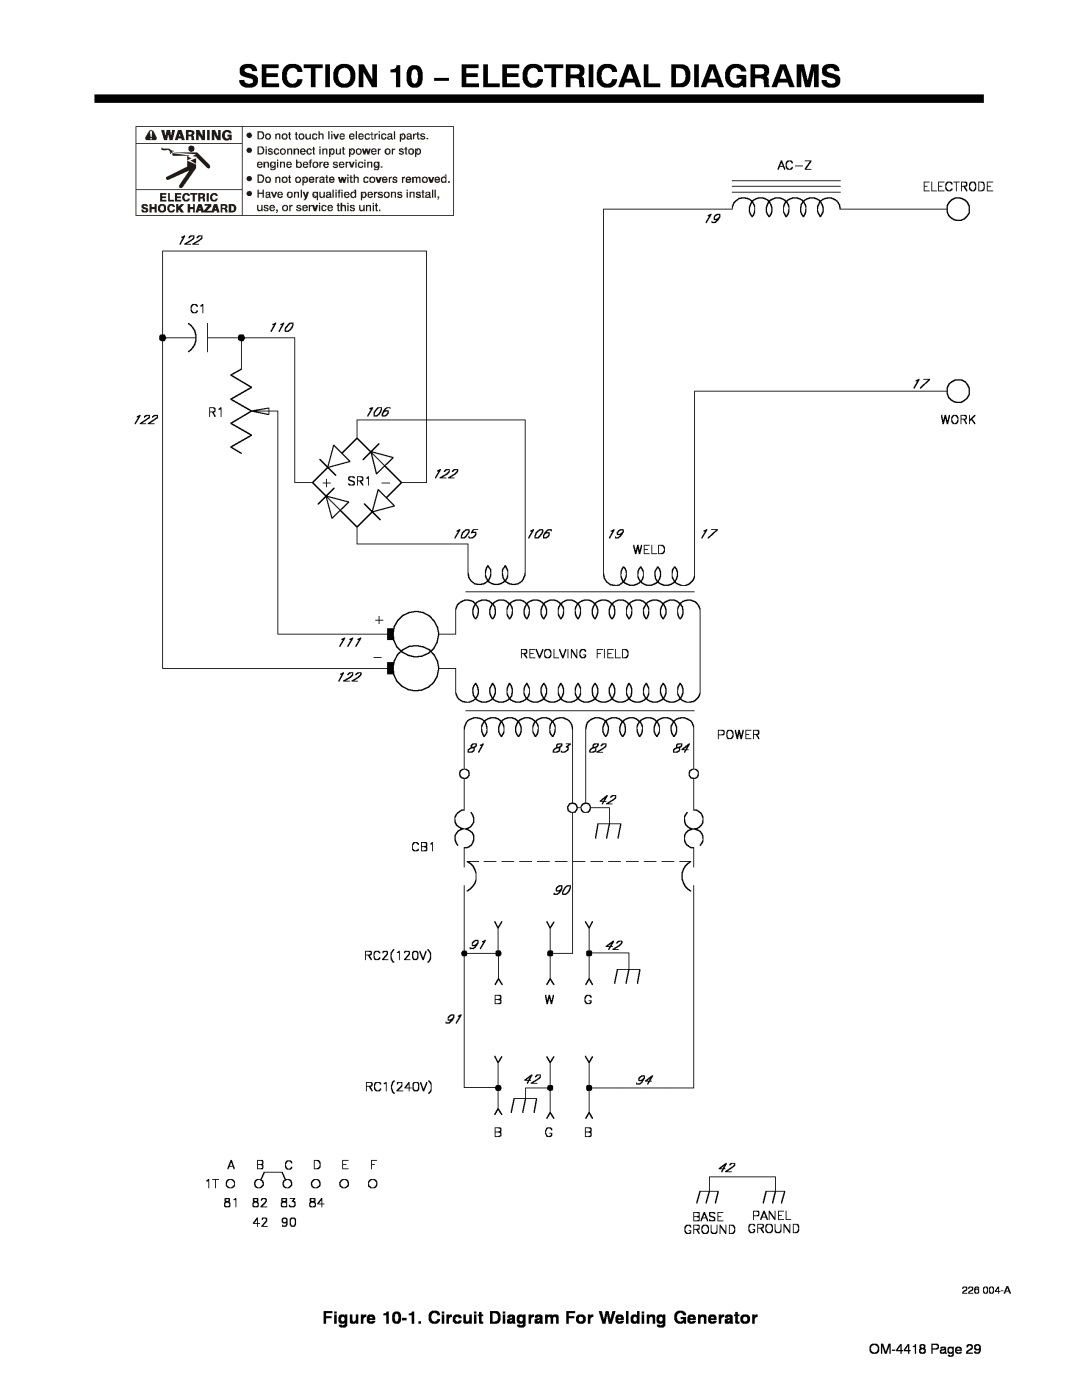 Hobart Welding Products 4500 manual Electrical Diagrams, 1. Circuit Diagram For Welding Generator, 226 004-A 